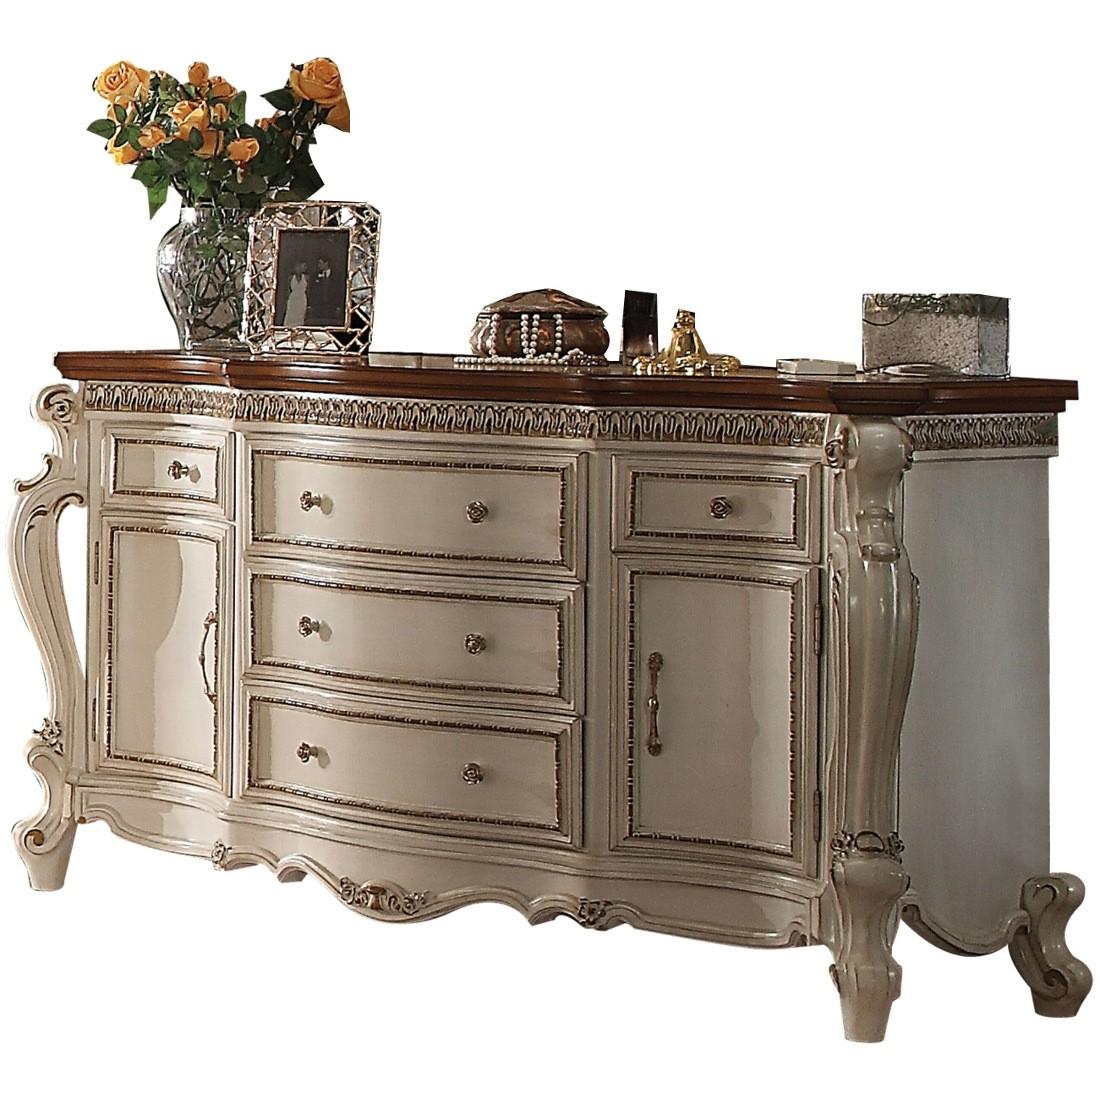 Classic, Traditional Combo Dresser Picardy-26905 Picardy-26905 in Oak, Pearl, Cherry, Antique 